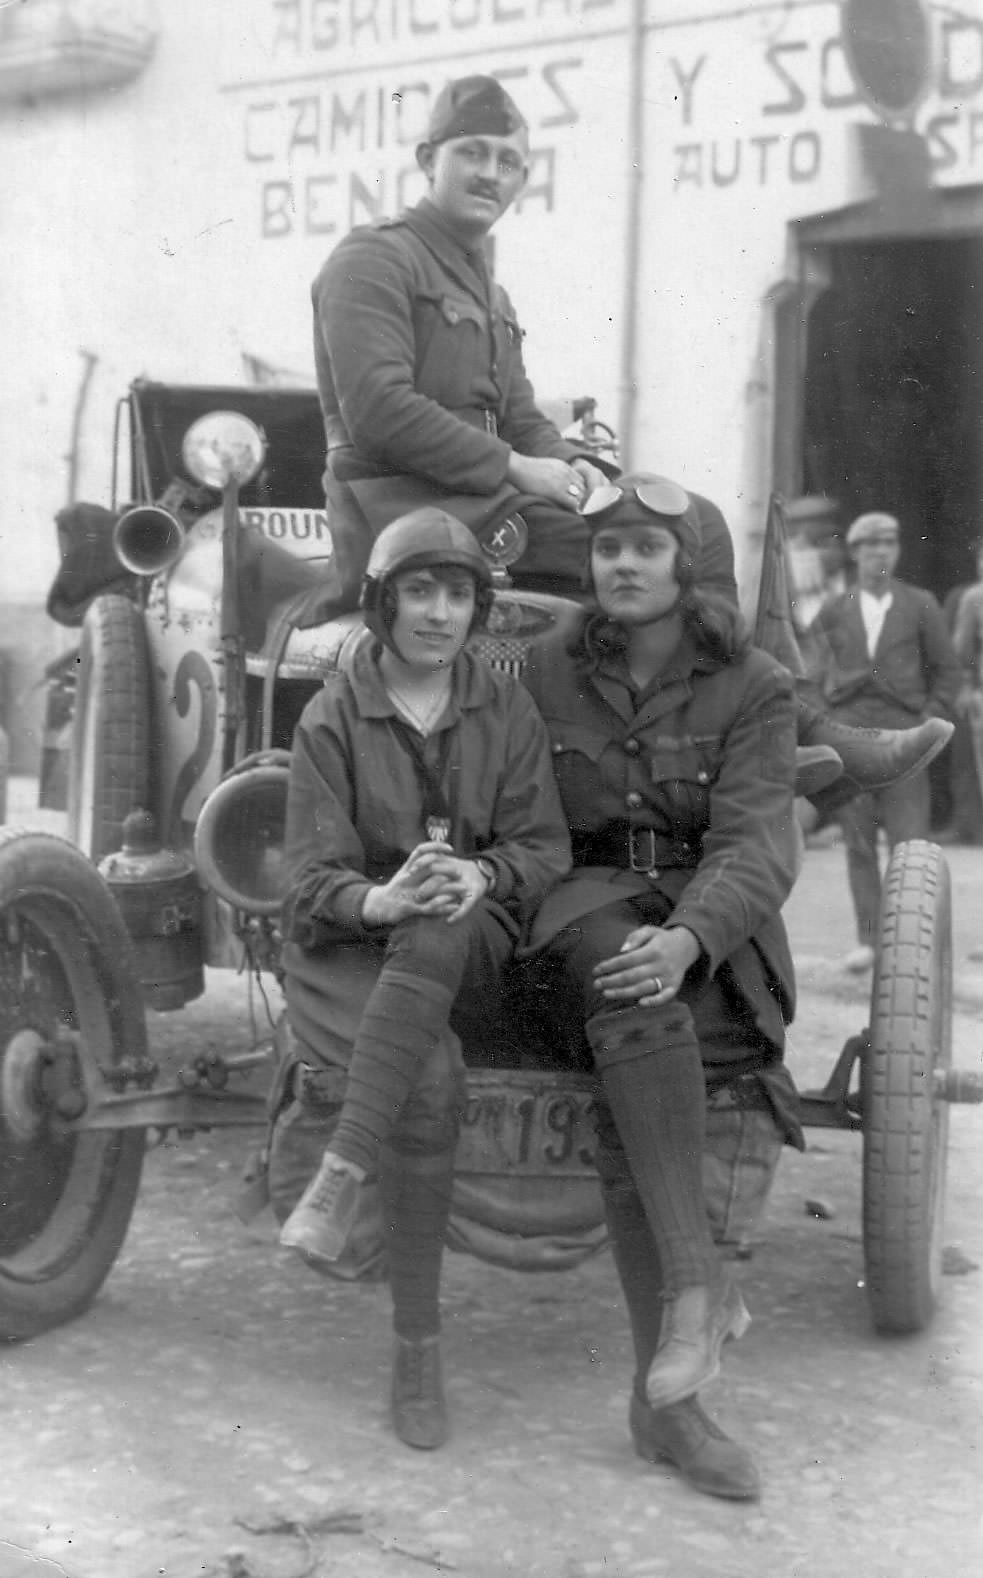 The Captivating Story of Aloha Wanderwell, the Woman Who Drove Around the World